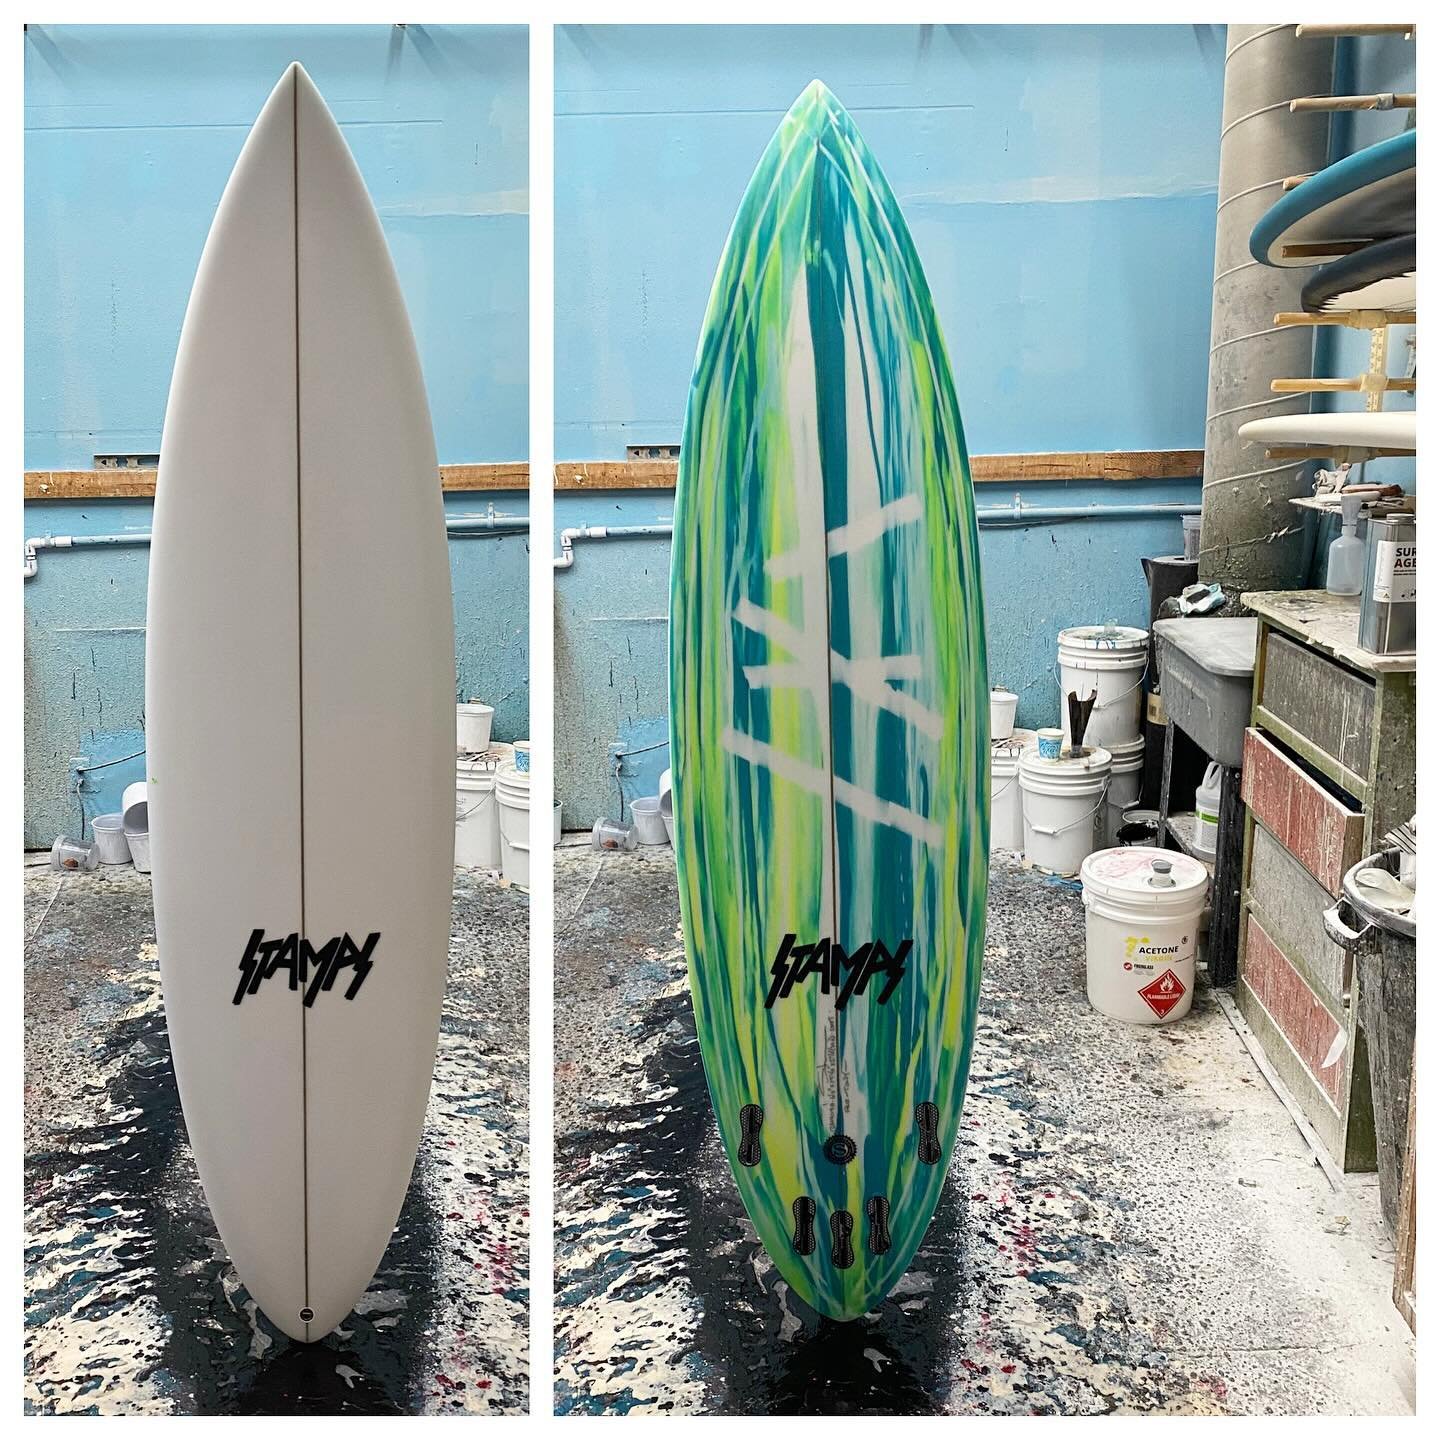 :: GXRT 6&rsquo;6&rdquo; x 19 5/8&rdquo; x 2 5/8&rdquo; at 36.5 finely foiled liters :: lucky board is G-Land bound&hellip;. ::